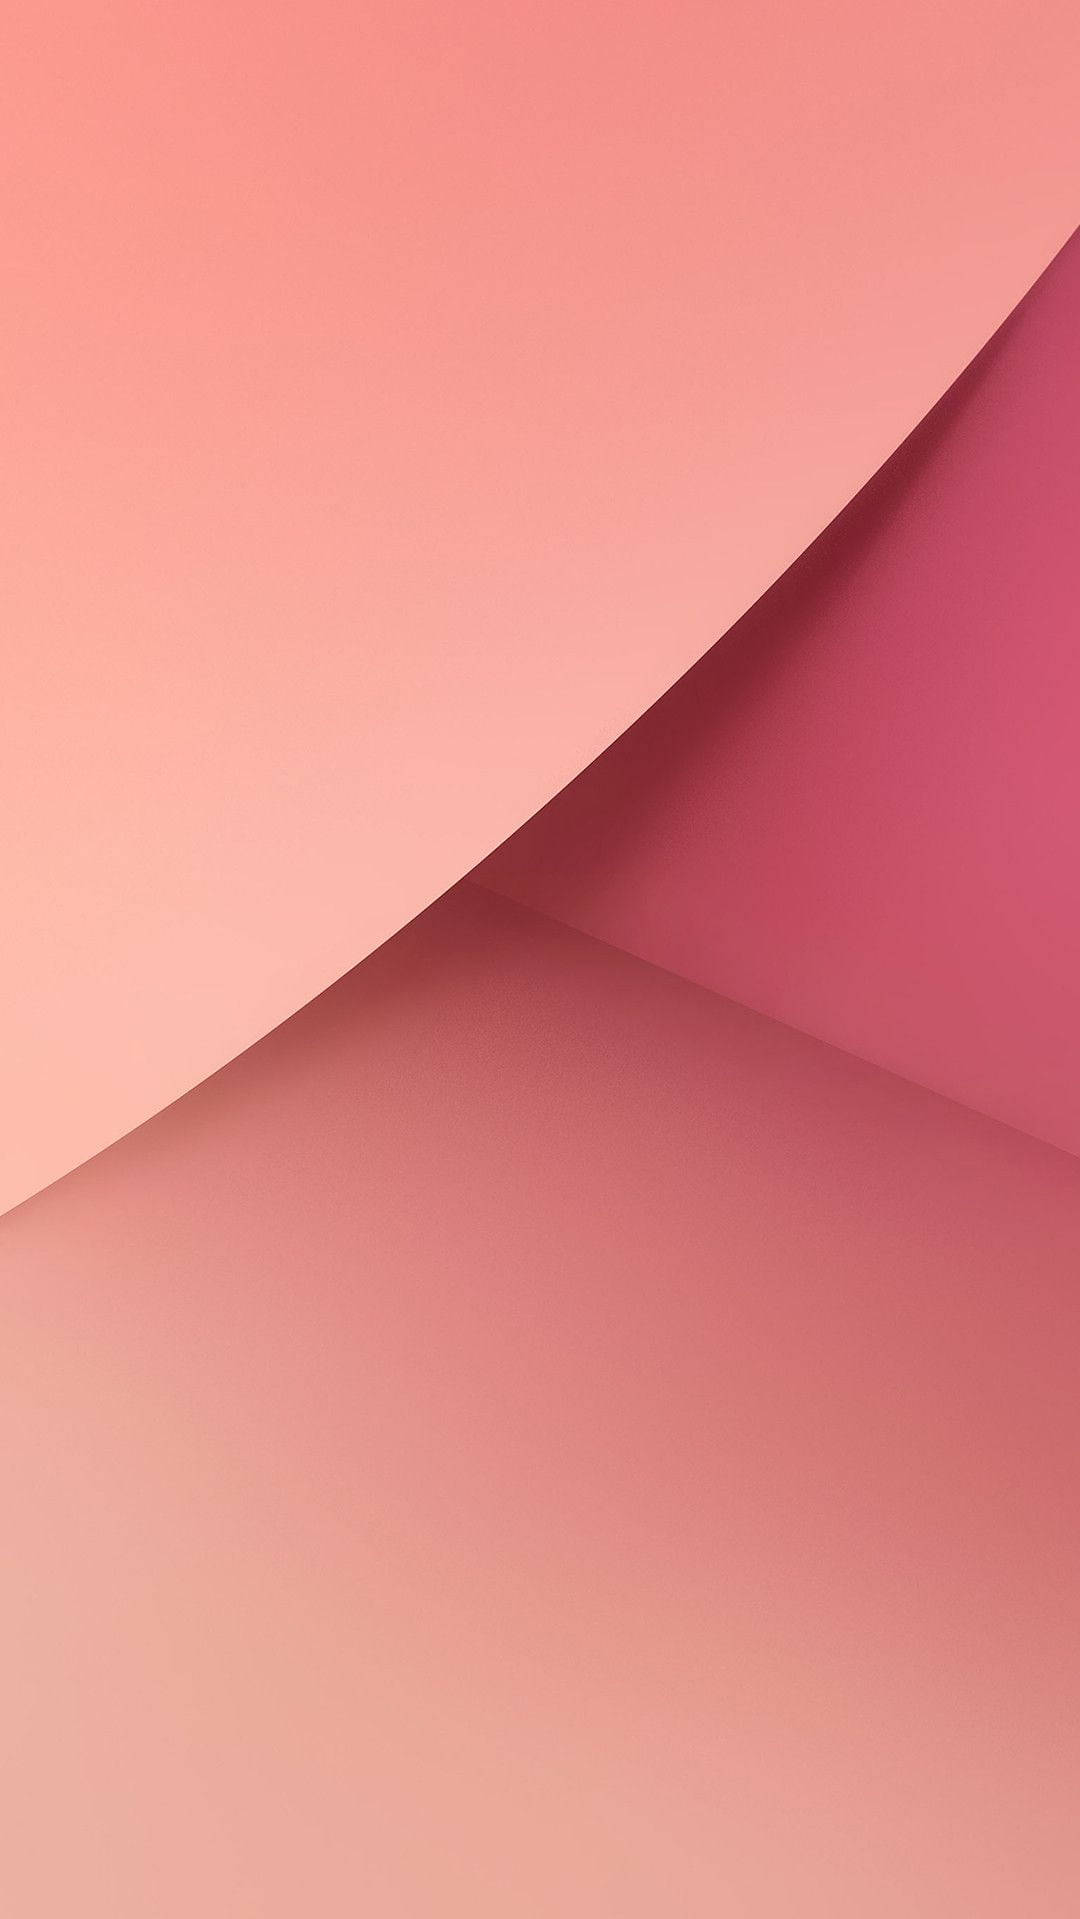 Surreal Pastel Red Aesthetic - The Perfect Blend Of Soft And Bold Background